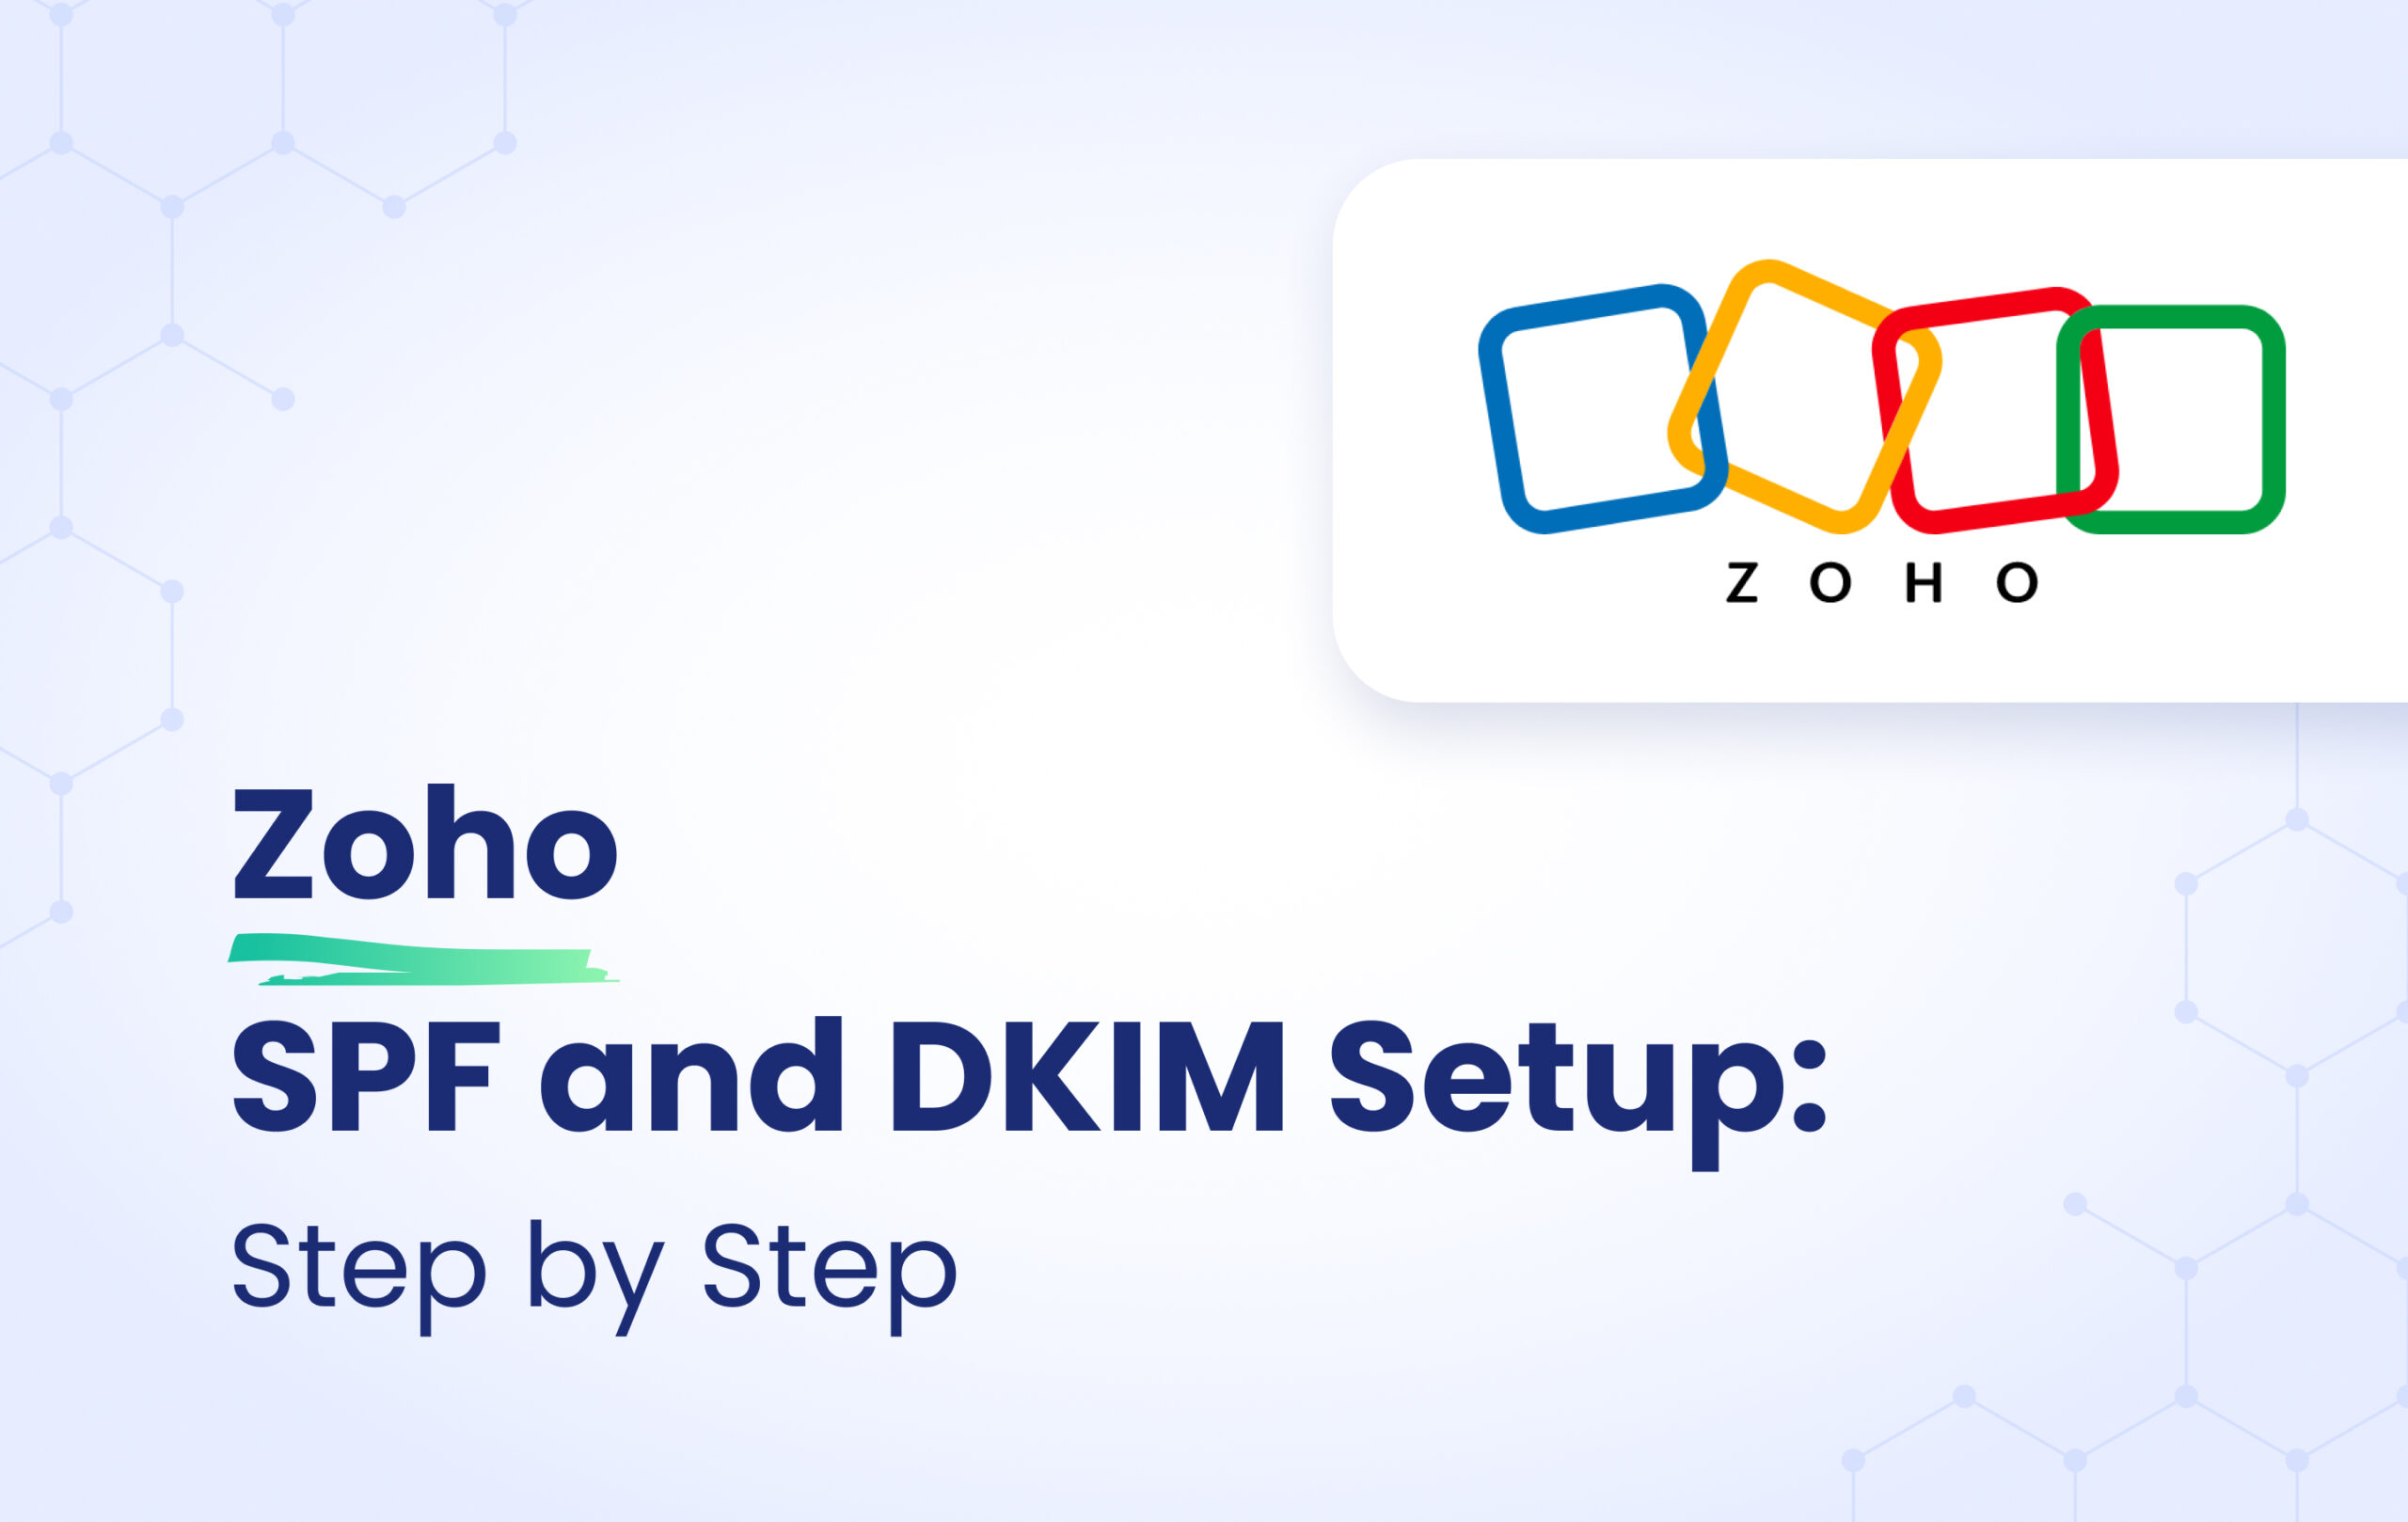 Zoho Mail SPF and DKIM Setup: Step-by-Step featured image